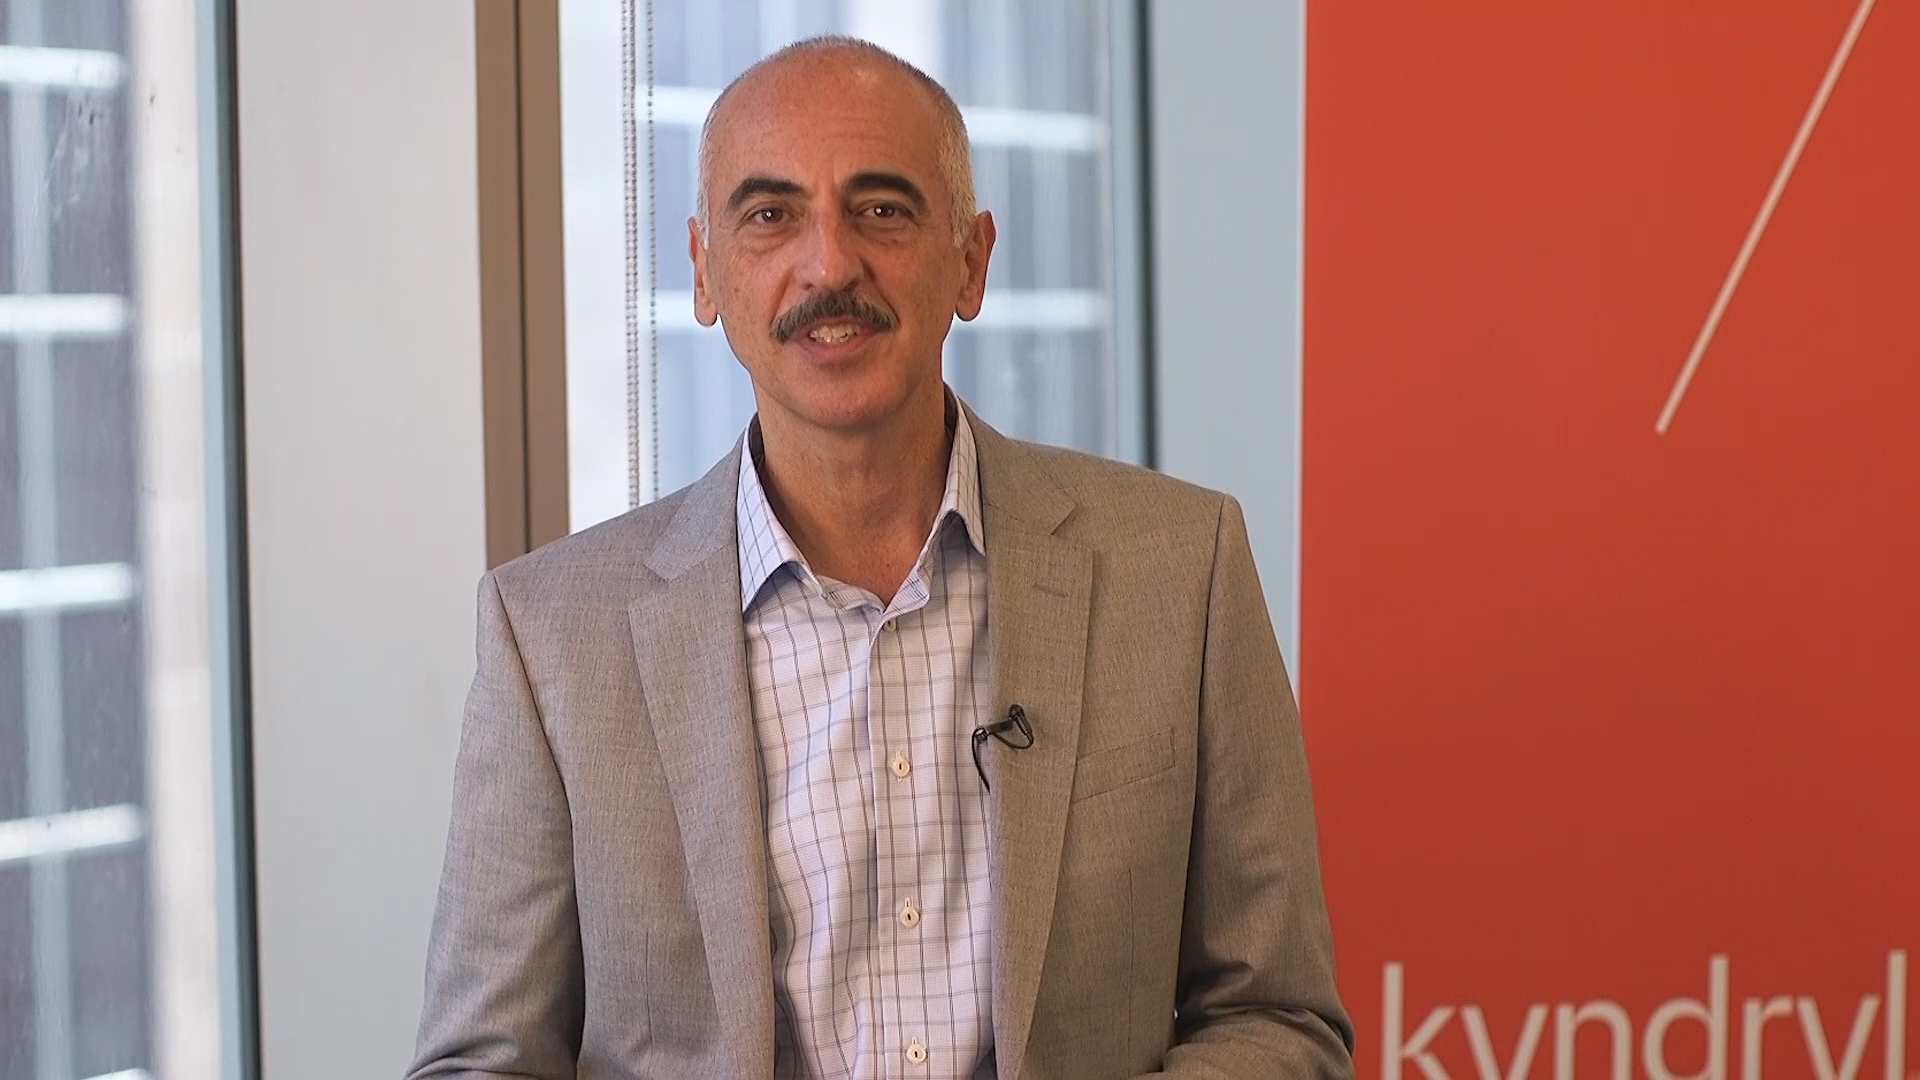 Antoine Shagoury, Kyndryl’s Chief Technology Officer, discusses how Kyndryl Bridge is designed to meet customers where they are today, enabling interoperability that maximizes the value of tools they already know and trust.